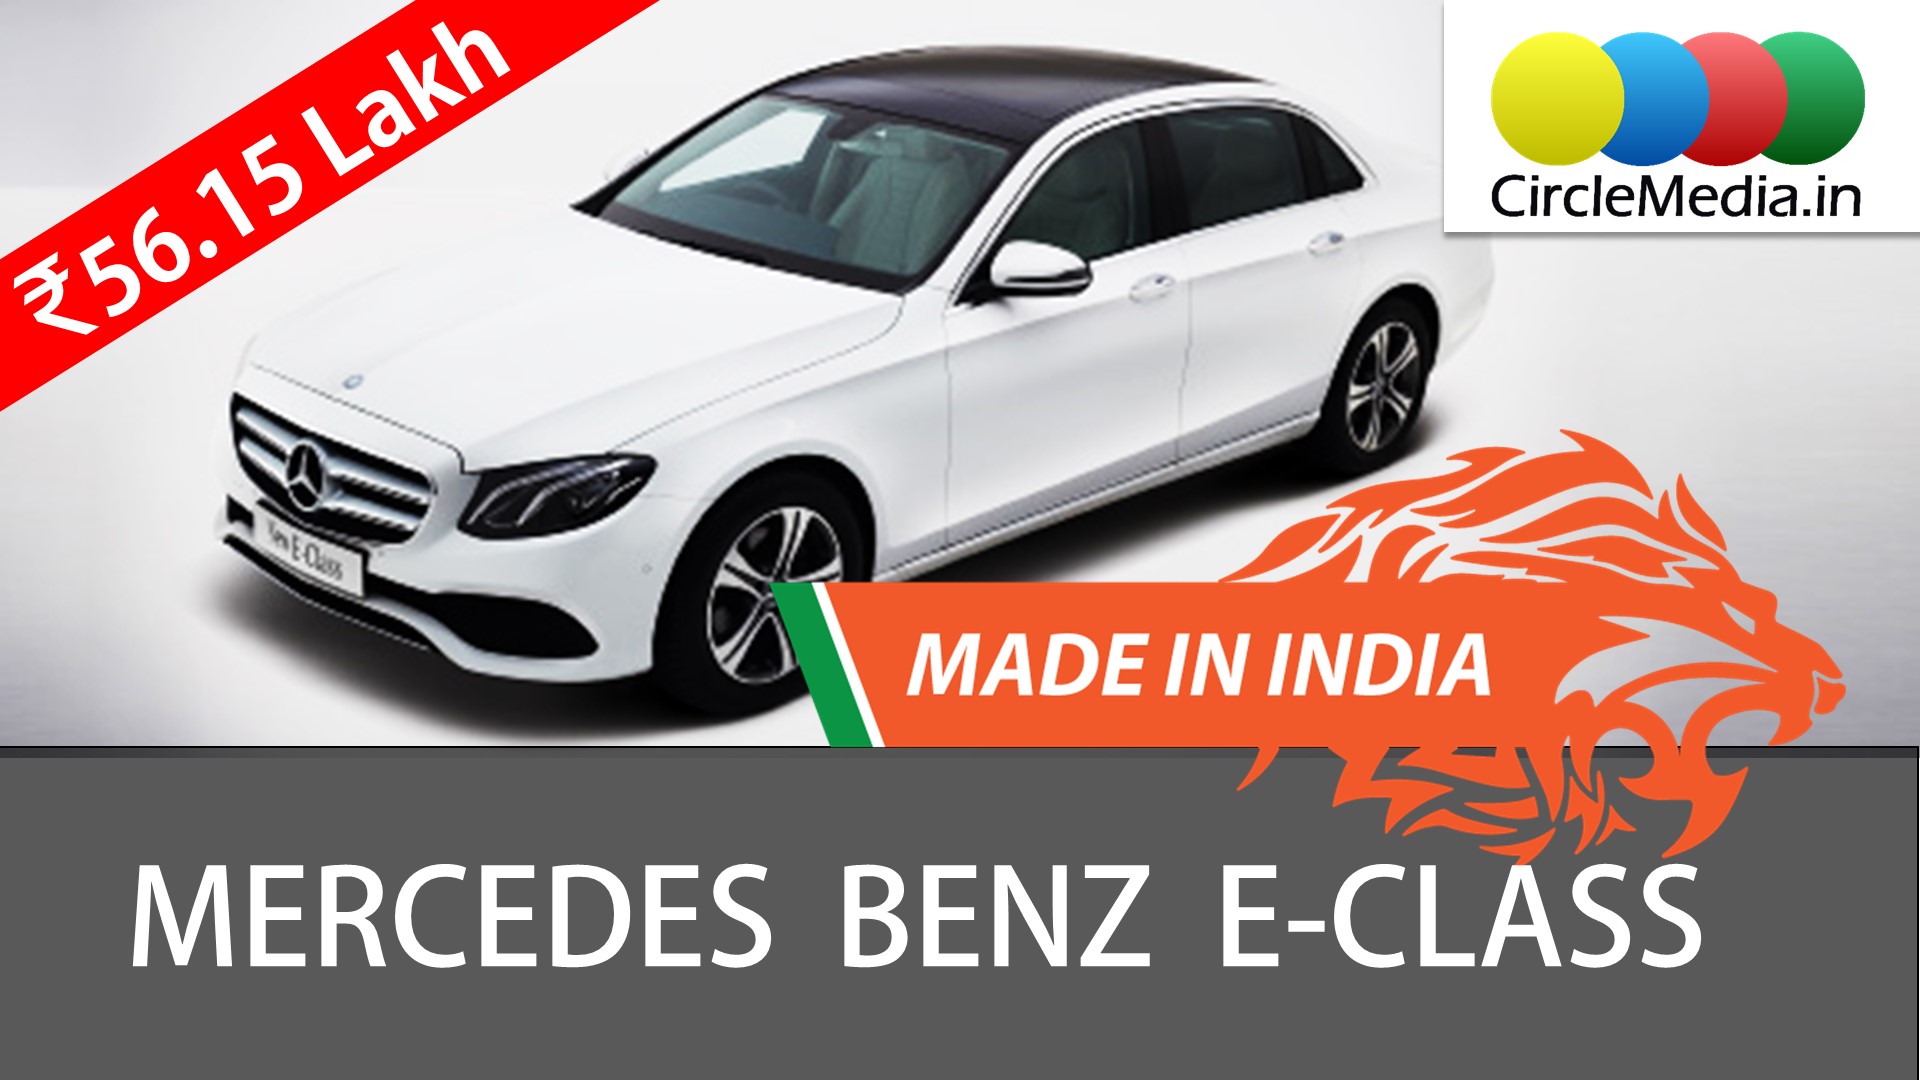 NEW Mercedes E-Class 2017 | Made In India | Price and Features of  Mercedes E-Class | CircleMedia.in